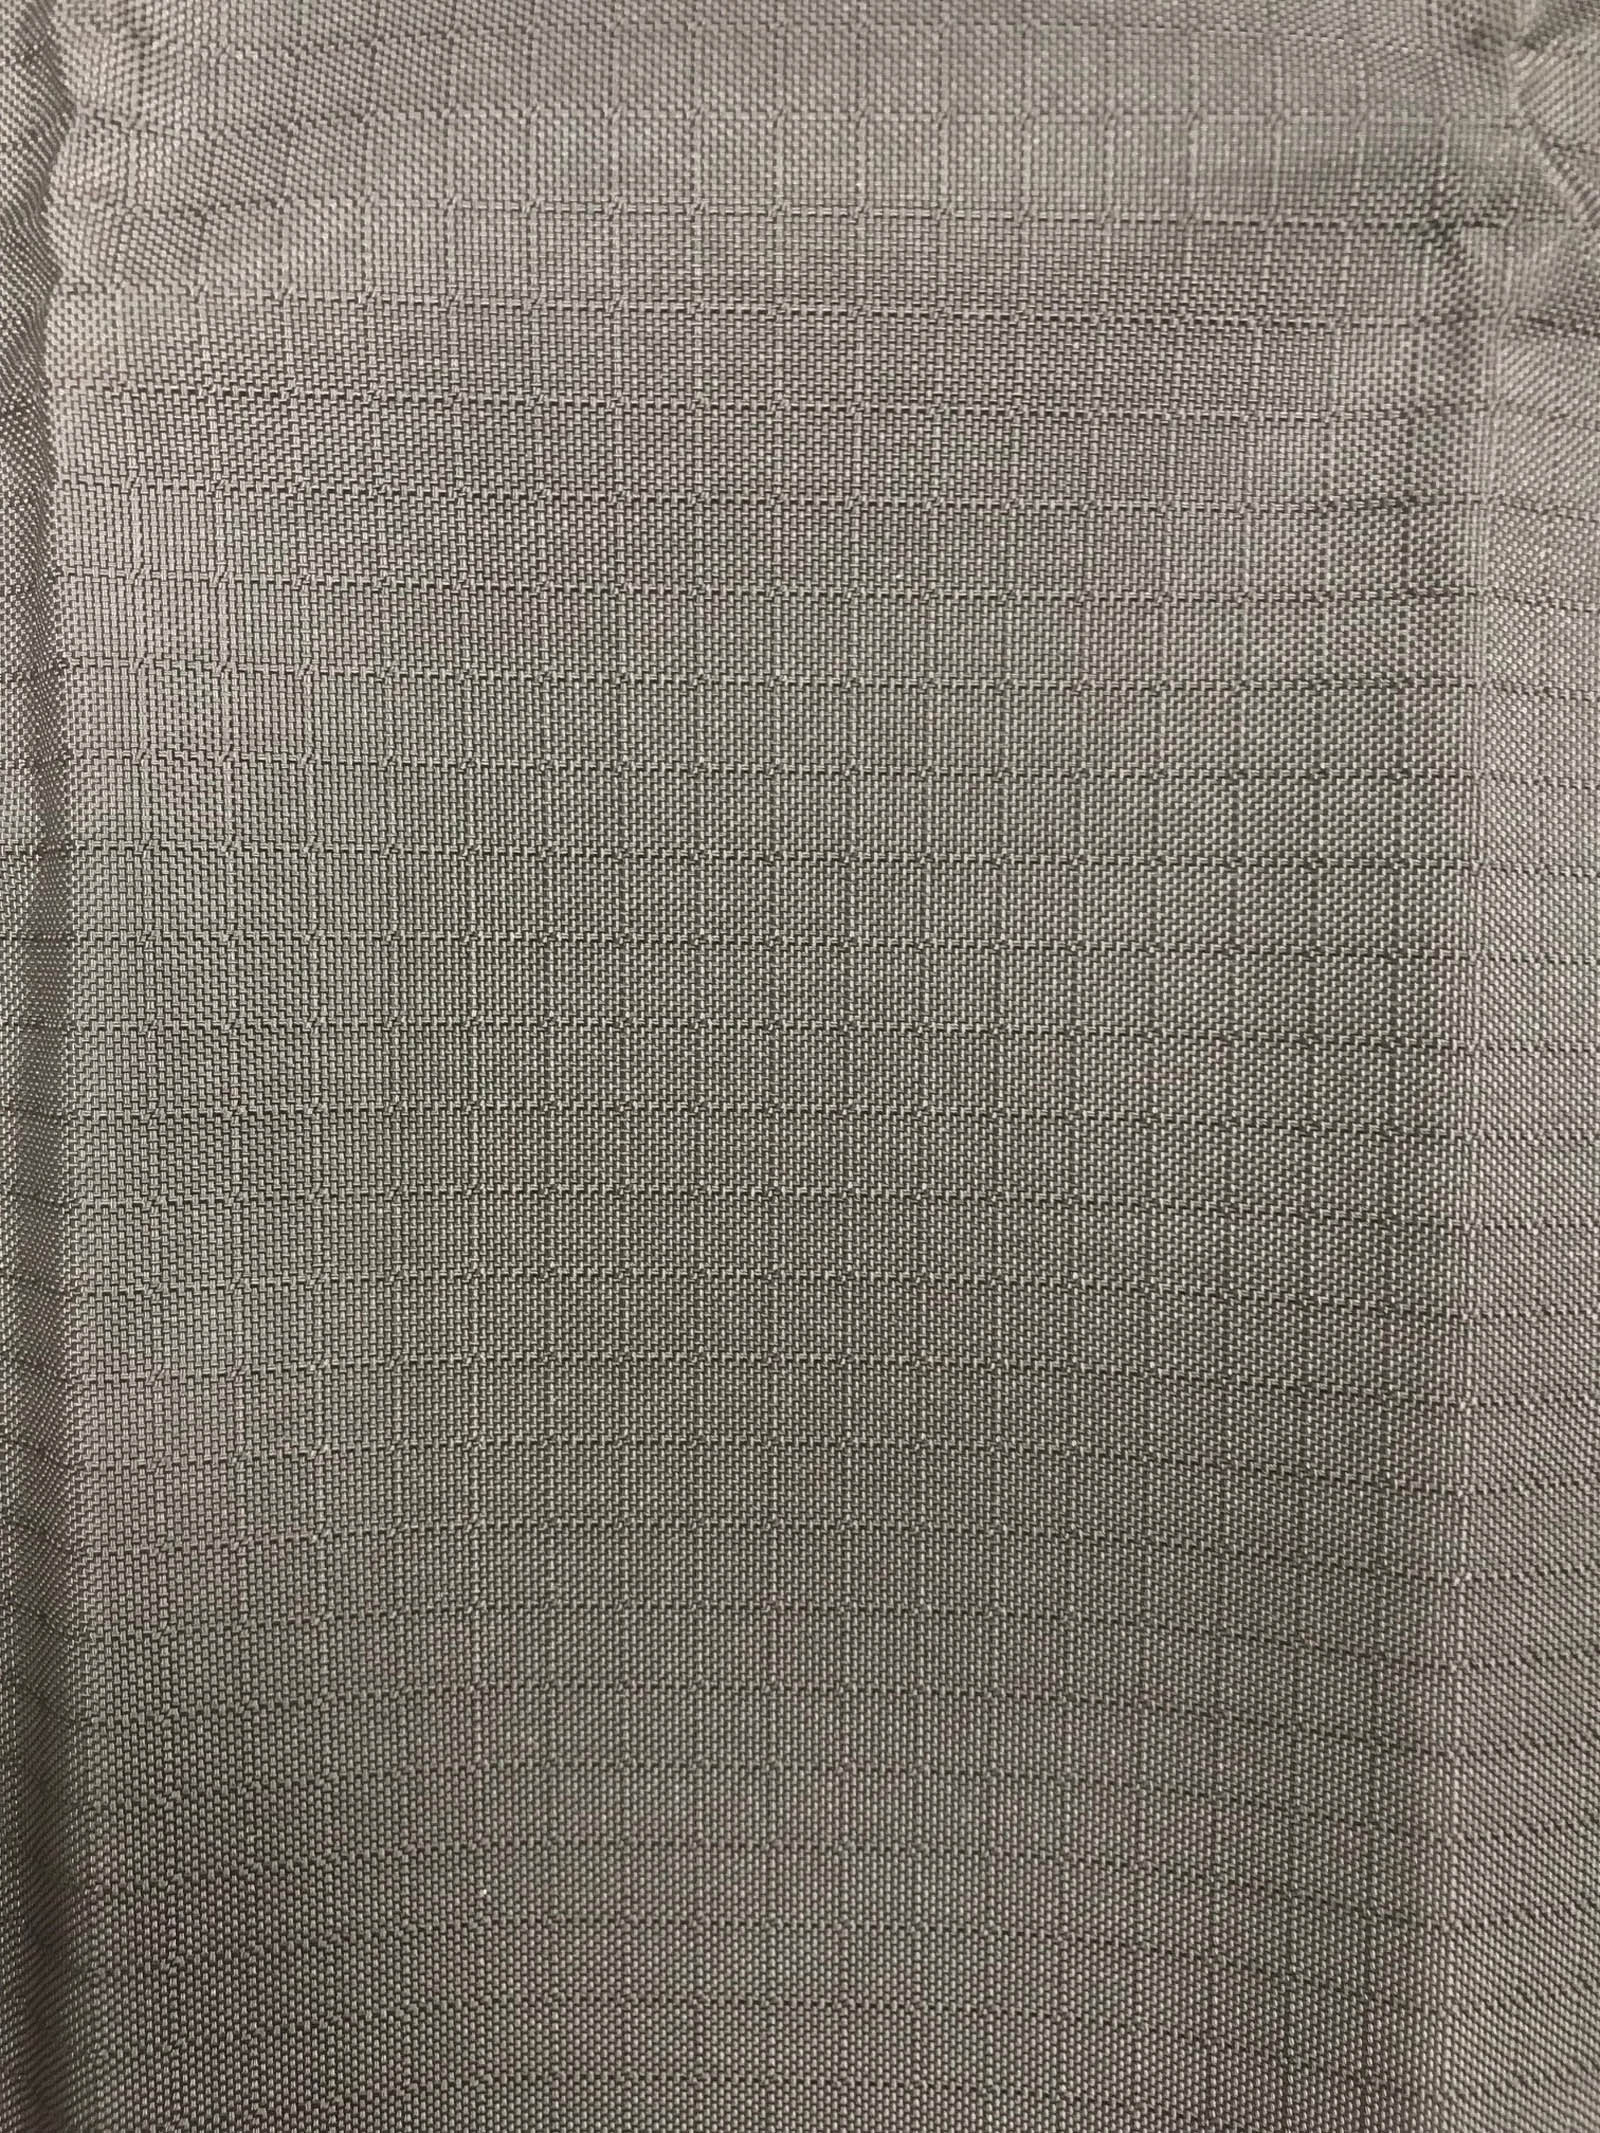 420D DWR Water  Repellent Fabric Image